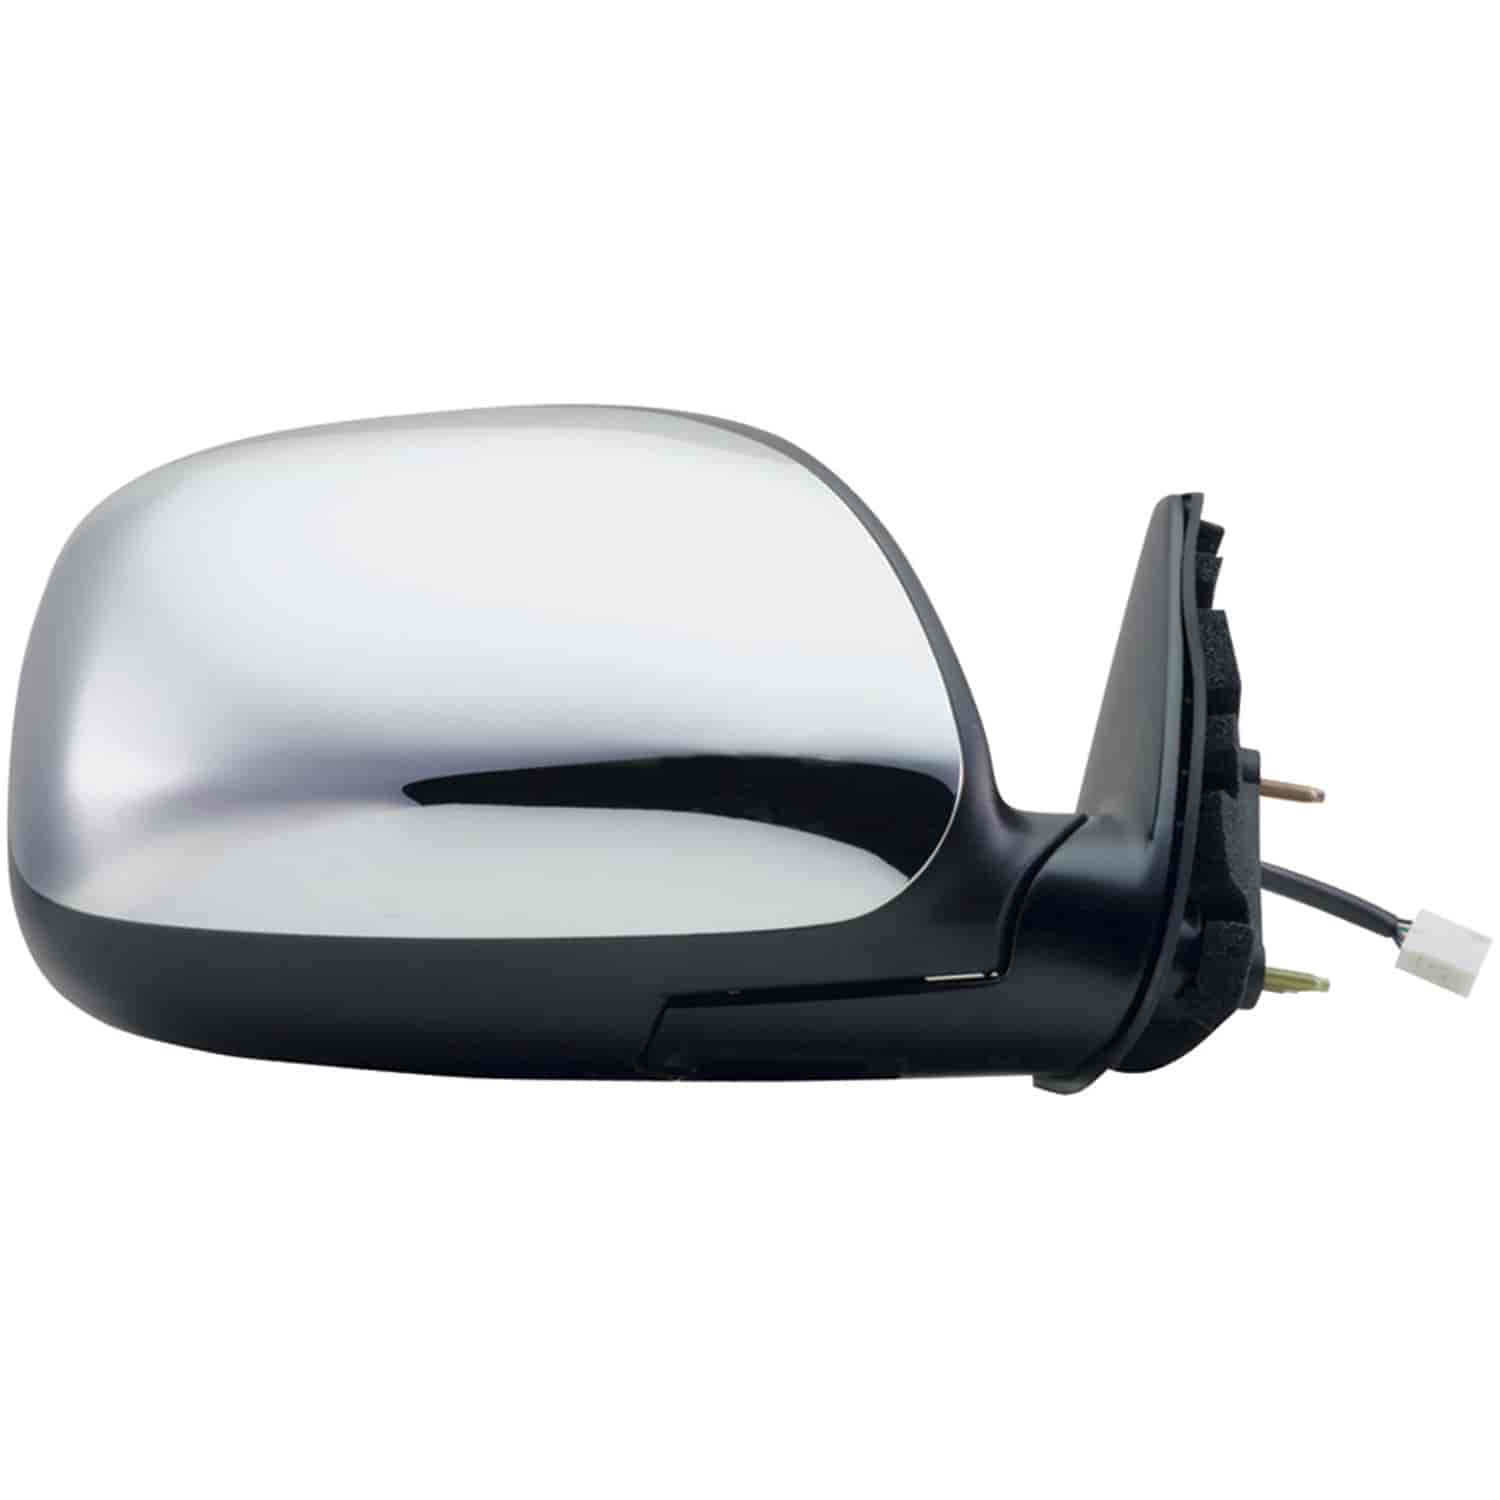 OEM Style Replacement mirror for 00-04 Toyota Tundra Pick-Up passenger side mirror tested to fit and